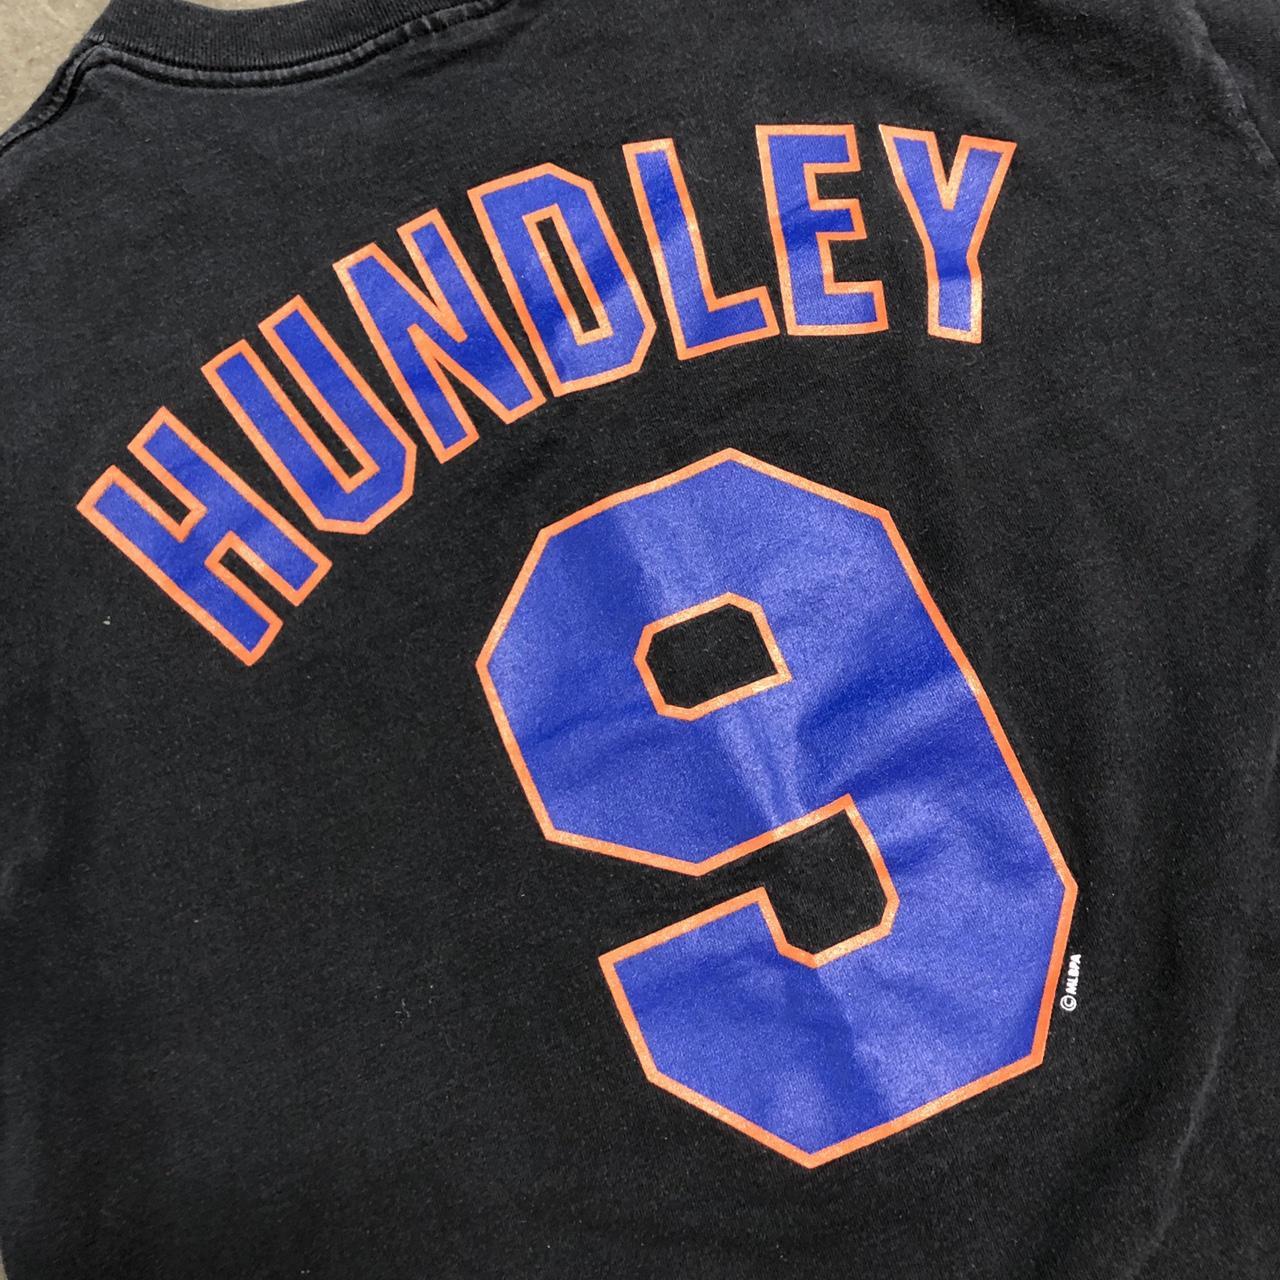 Today's vintage mail day! 1995-96 Todd Hundley Mets road jersey